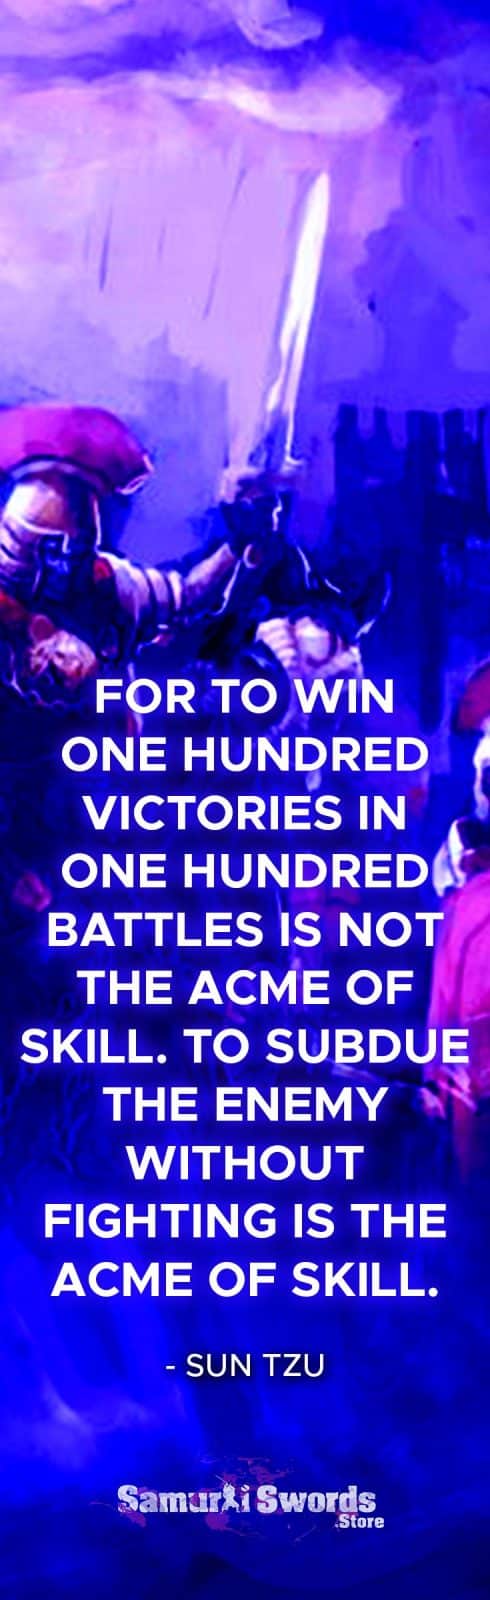 For to win one hundred victories in one hundred battles is not the acme of skill. To subdue the enemy without fighting is the acme of skill. - Sun Tzu